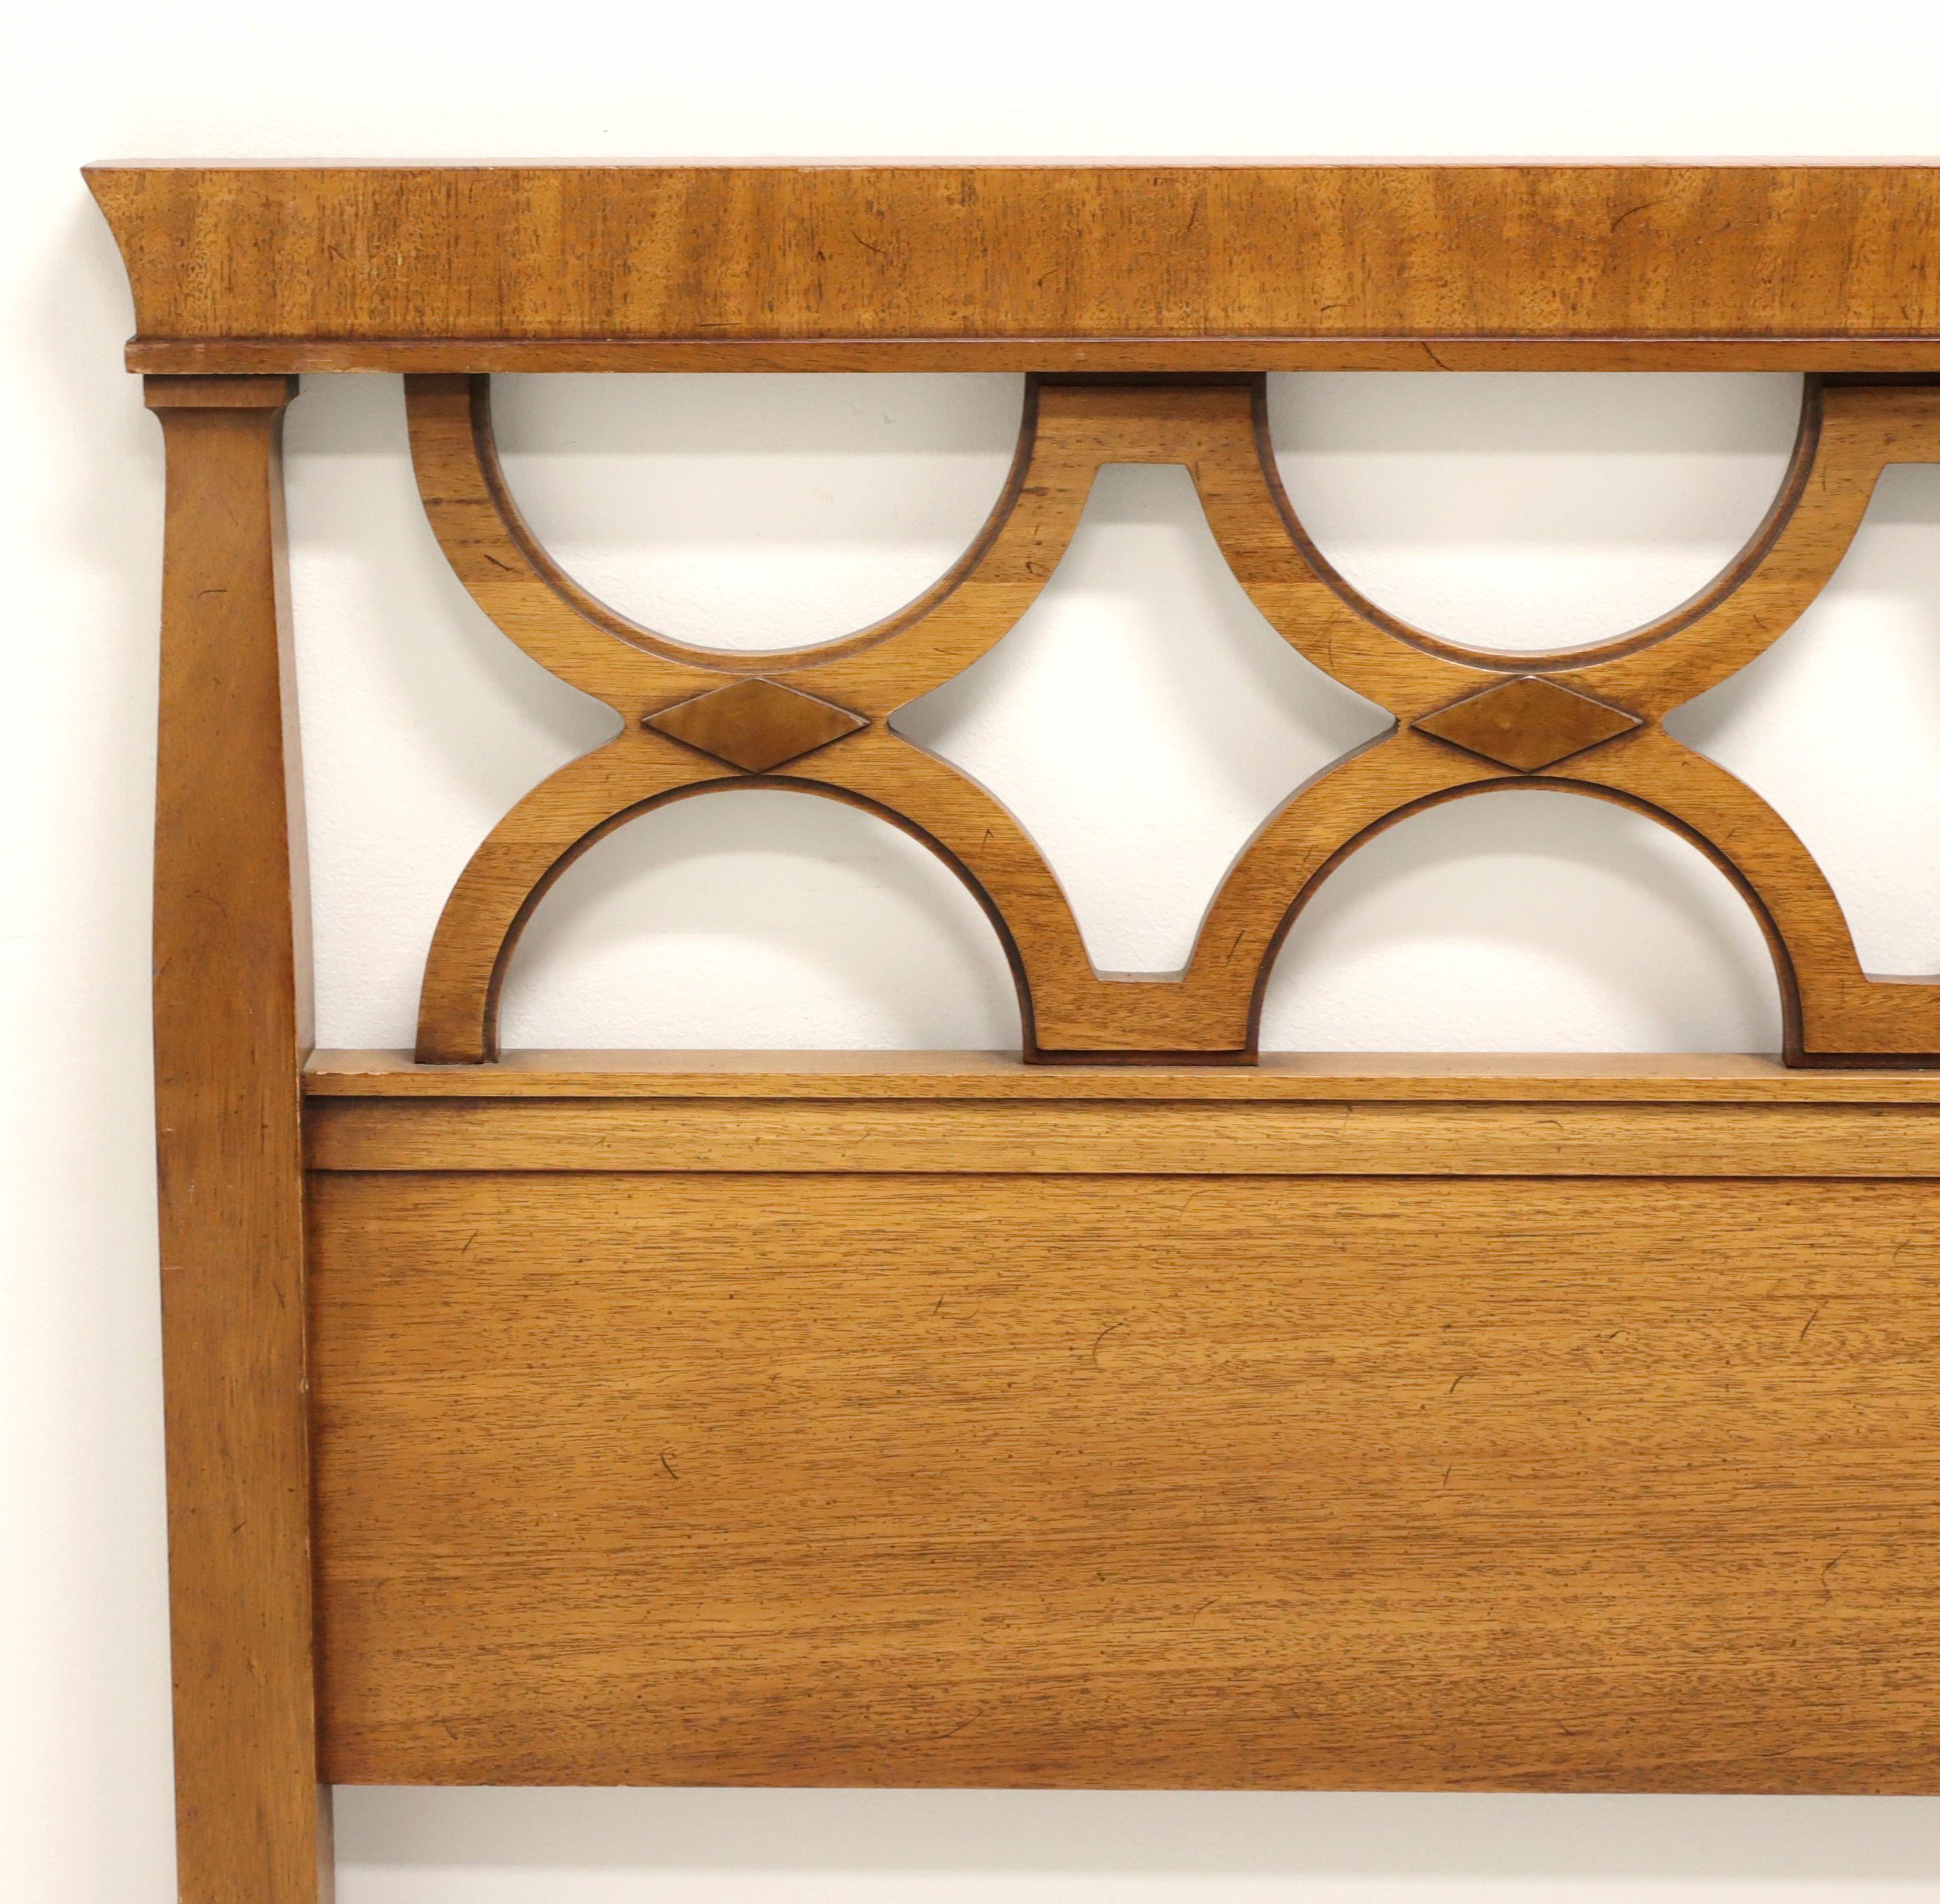 A pair of Neoclassical style twin size headboards by Drexel Furniture. Walnut with carved half circle detail, column like sides and entablature like top. Made in North Carolina, USA, in the mid 20th Century.

Measures: 42.75w 1.25d 38.25h

Very